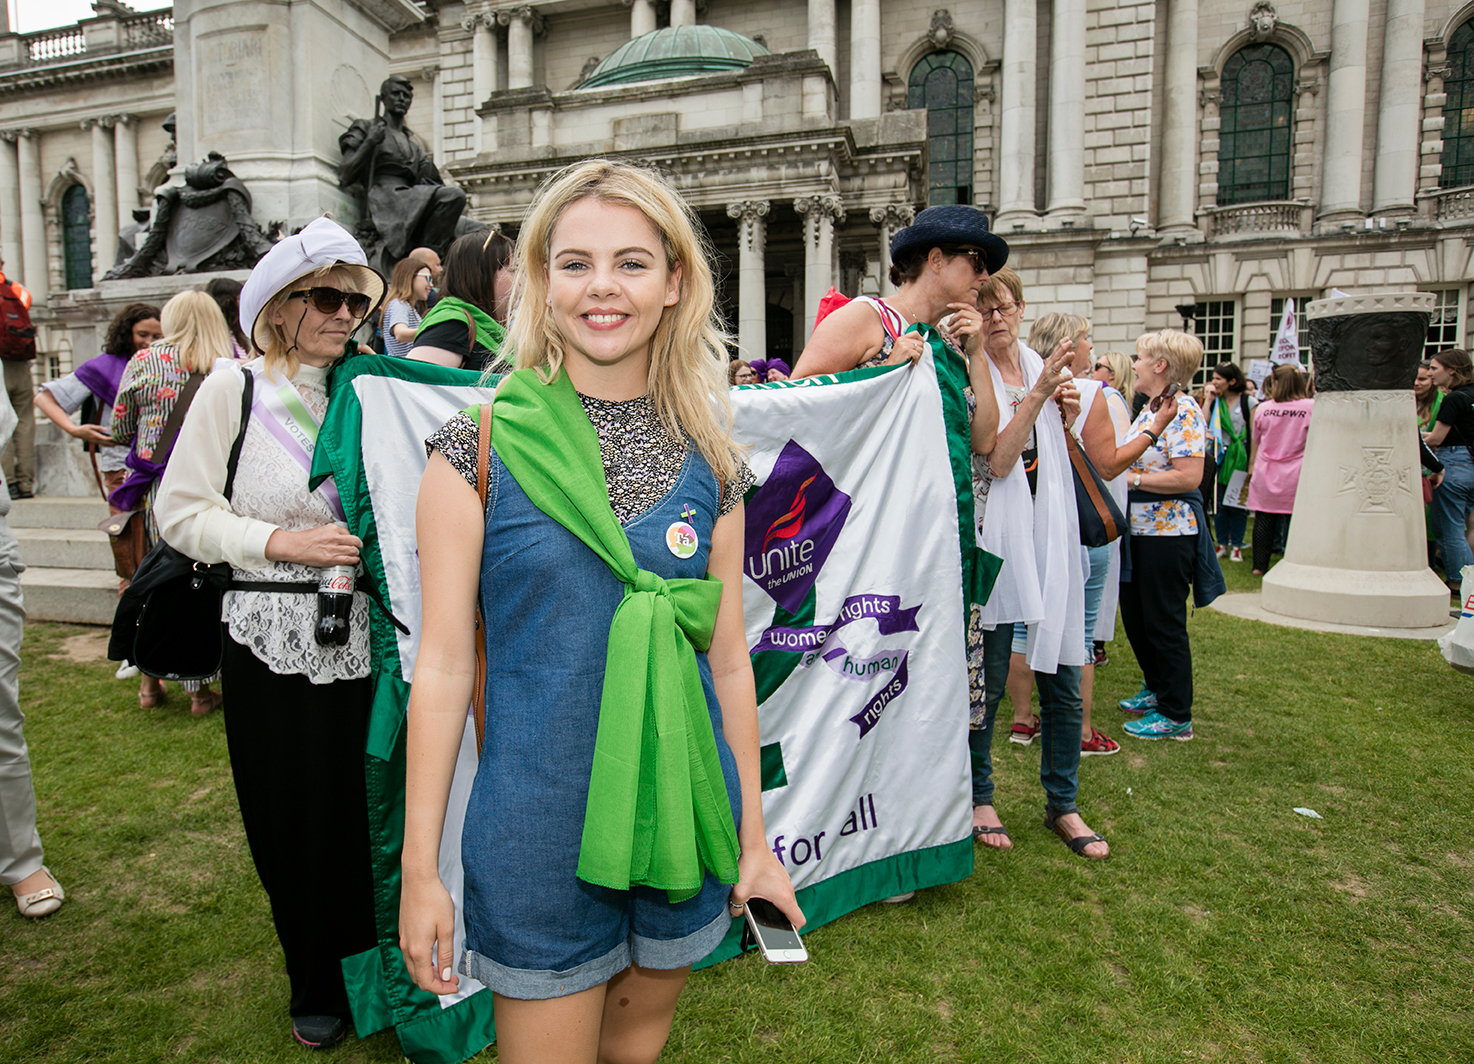 Saoirse-Monica Jackson at Processions, smiling with a green sash tied across her torso